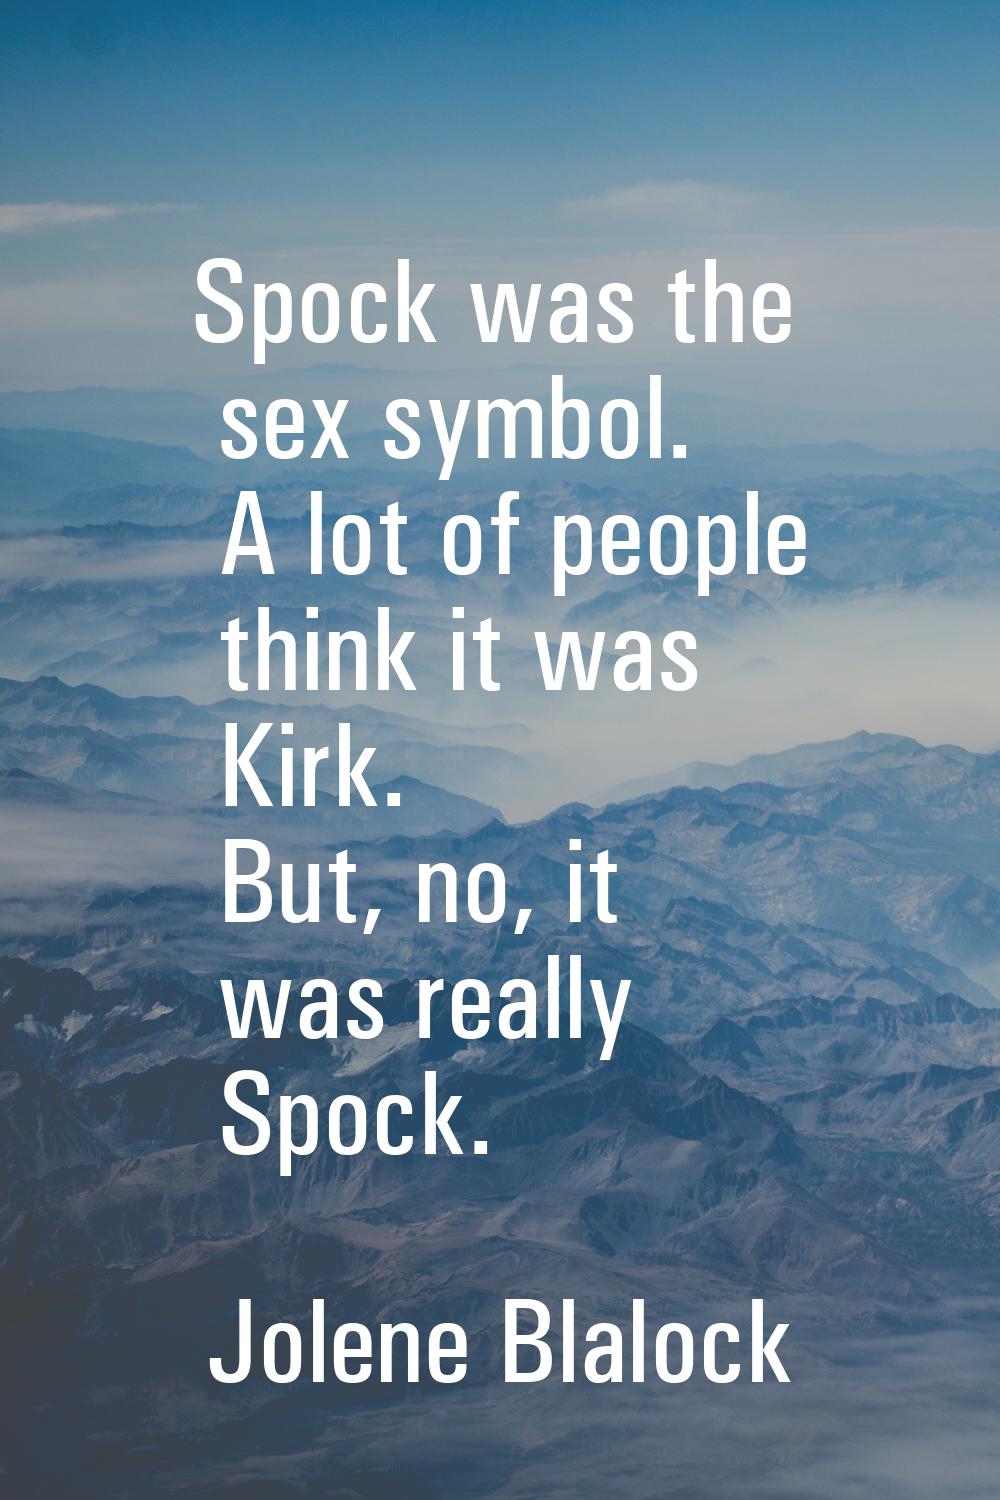 Spock was the sex symbol. A lot of people think it was Kirk. But, no, it was really Spock.